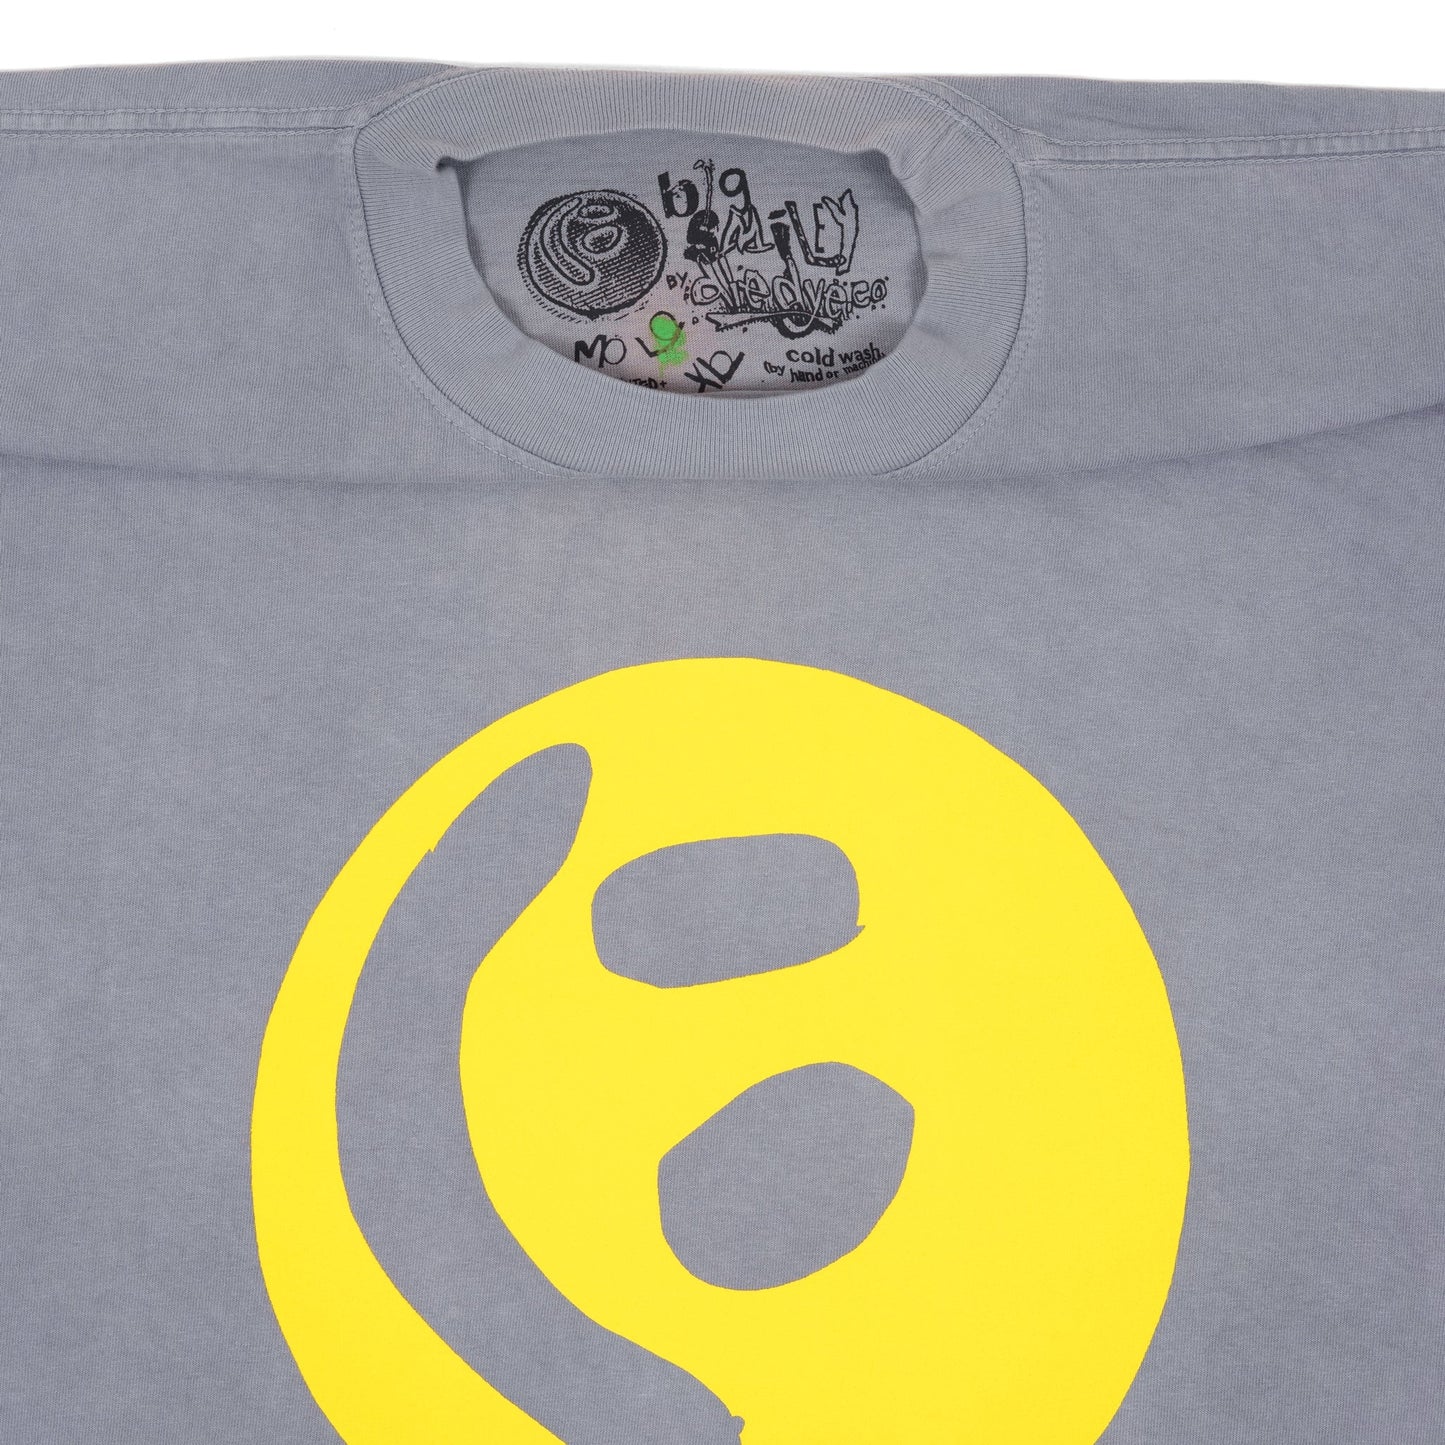 Big Smiley Long-Sleeve T (Wisteria)